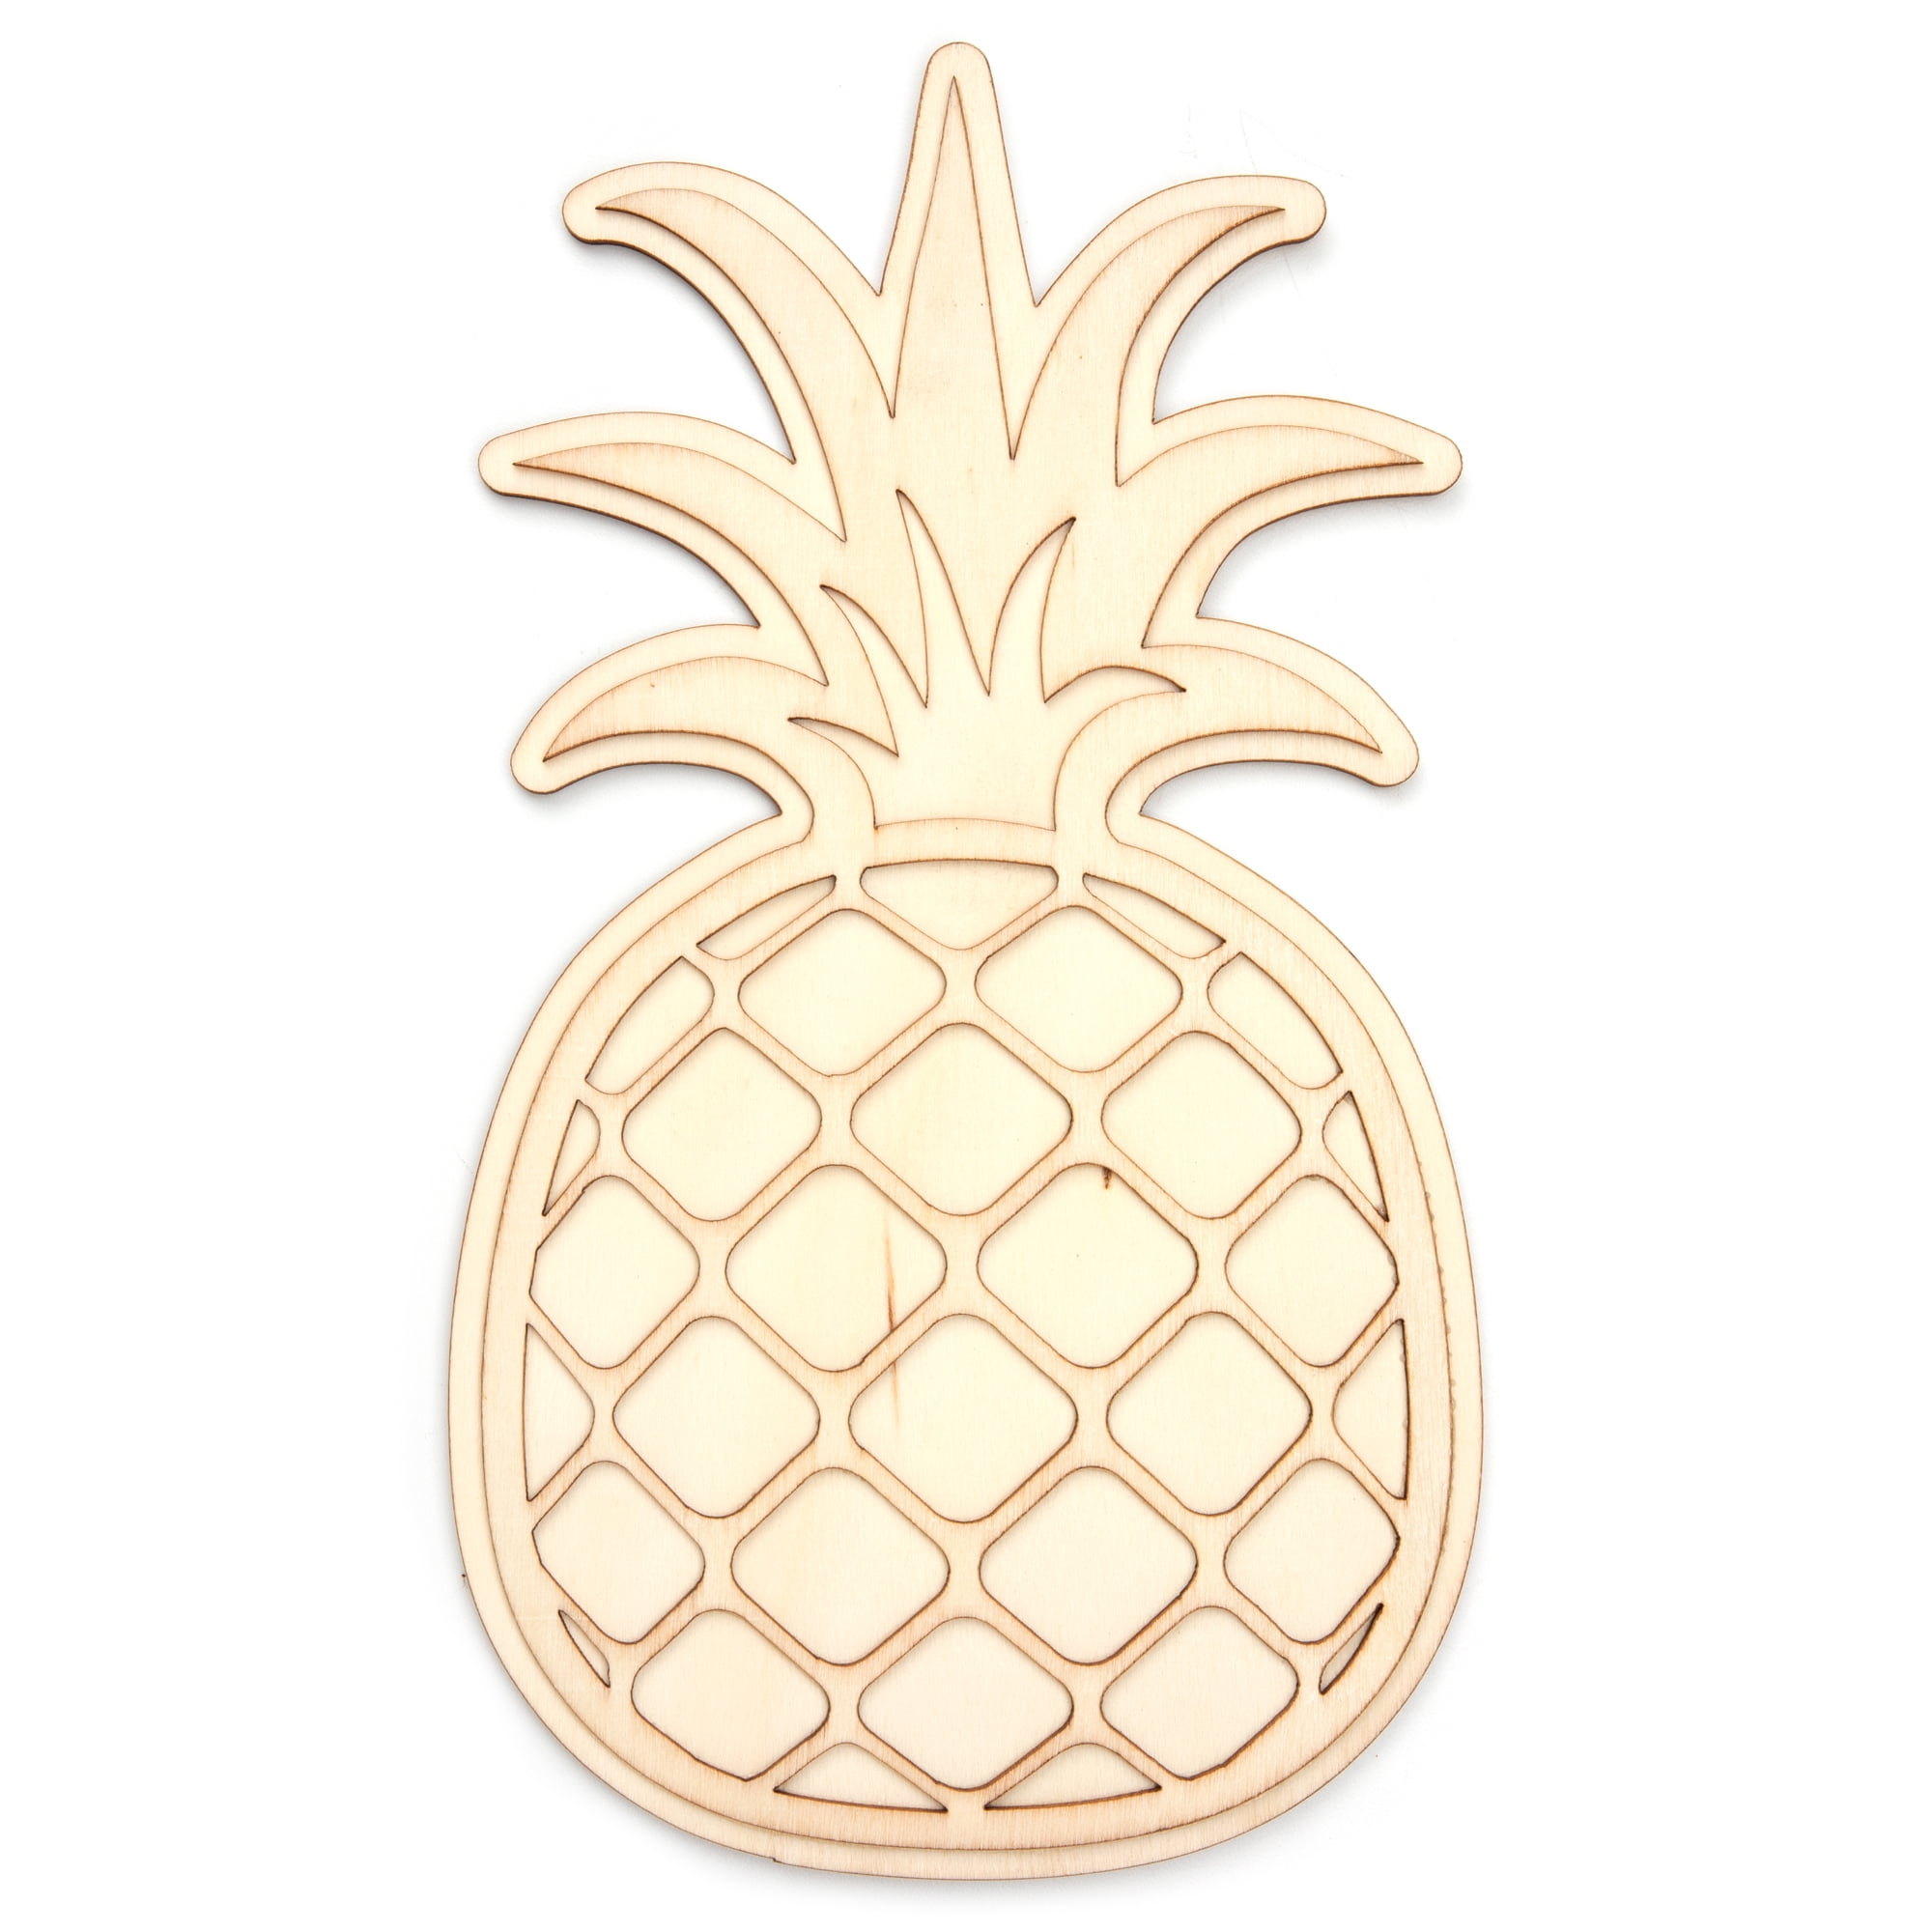 Laser Cut Pineapple with Sunglasses Wooden Holiday Ornament Gift Made in Hawaii 